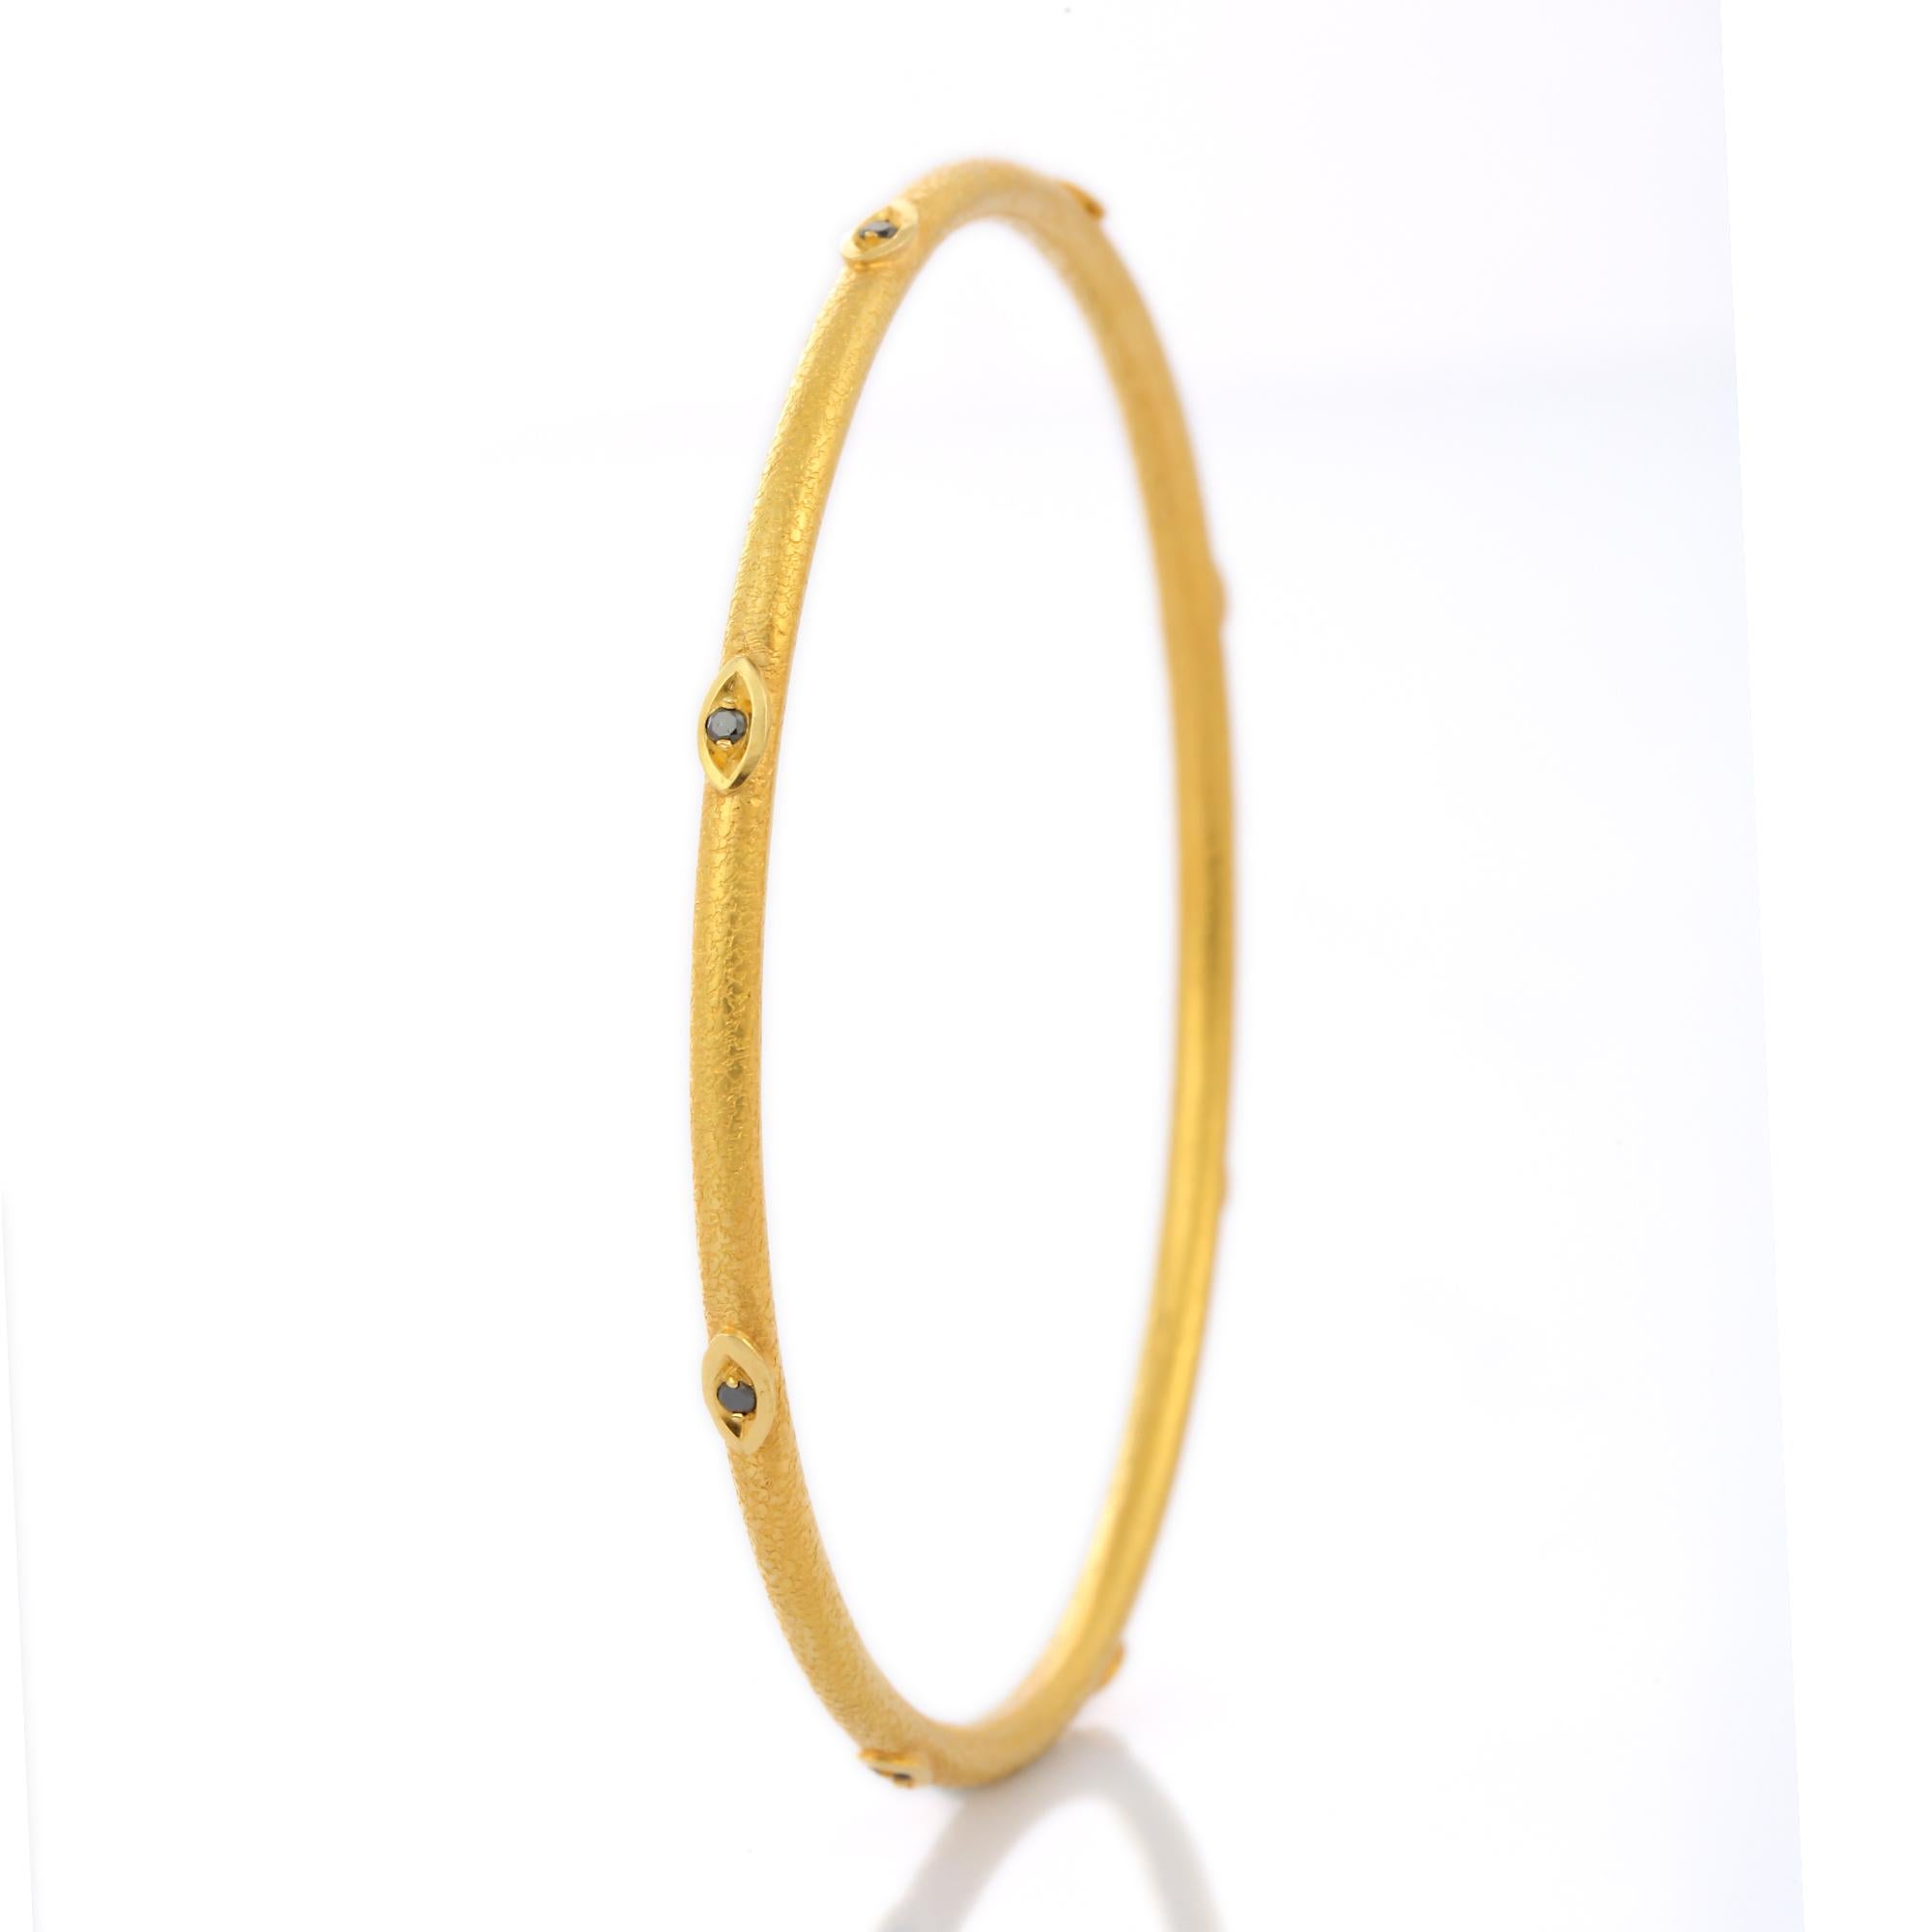 Modern Contemporary Black Diamond Bangle in 18K Solid Yellow Gold